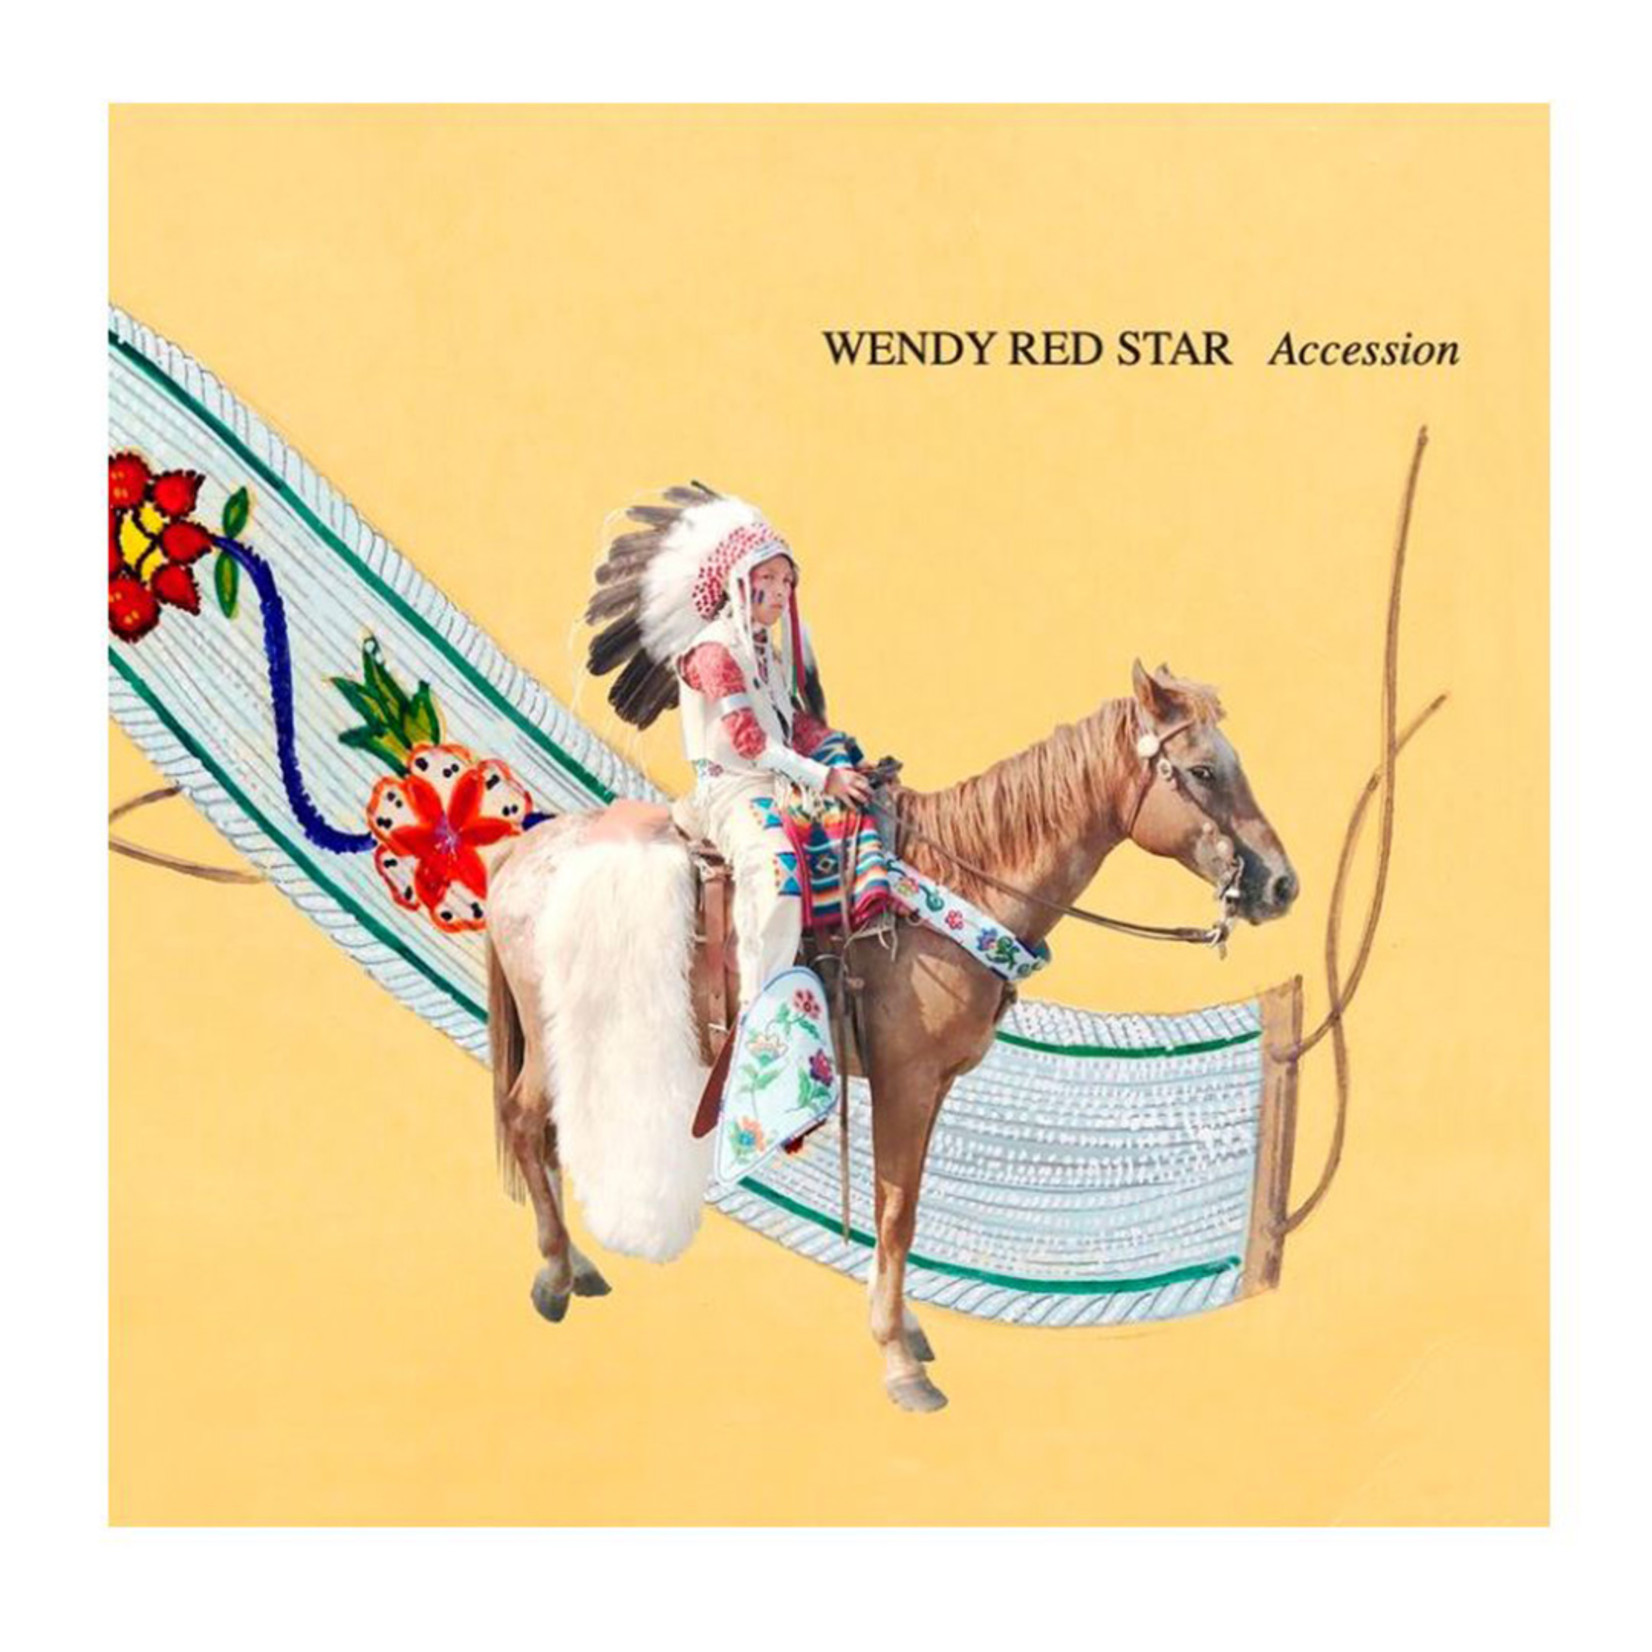 Accession! Wendy Red Star